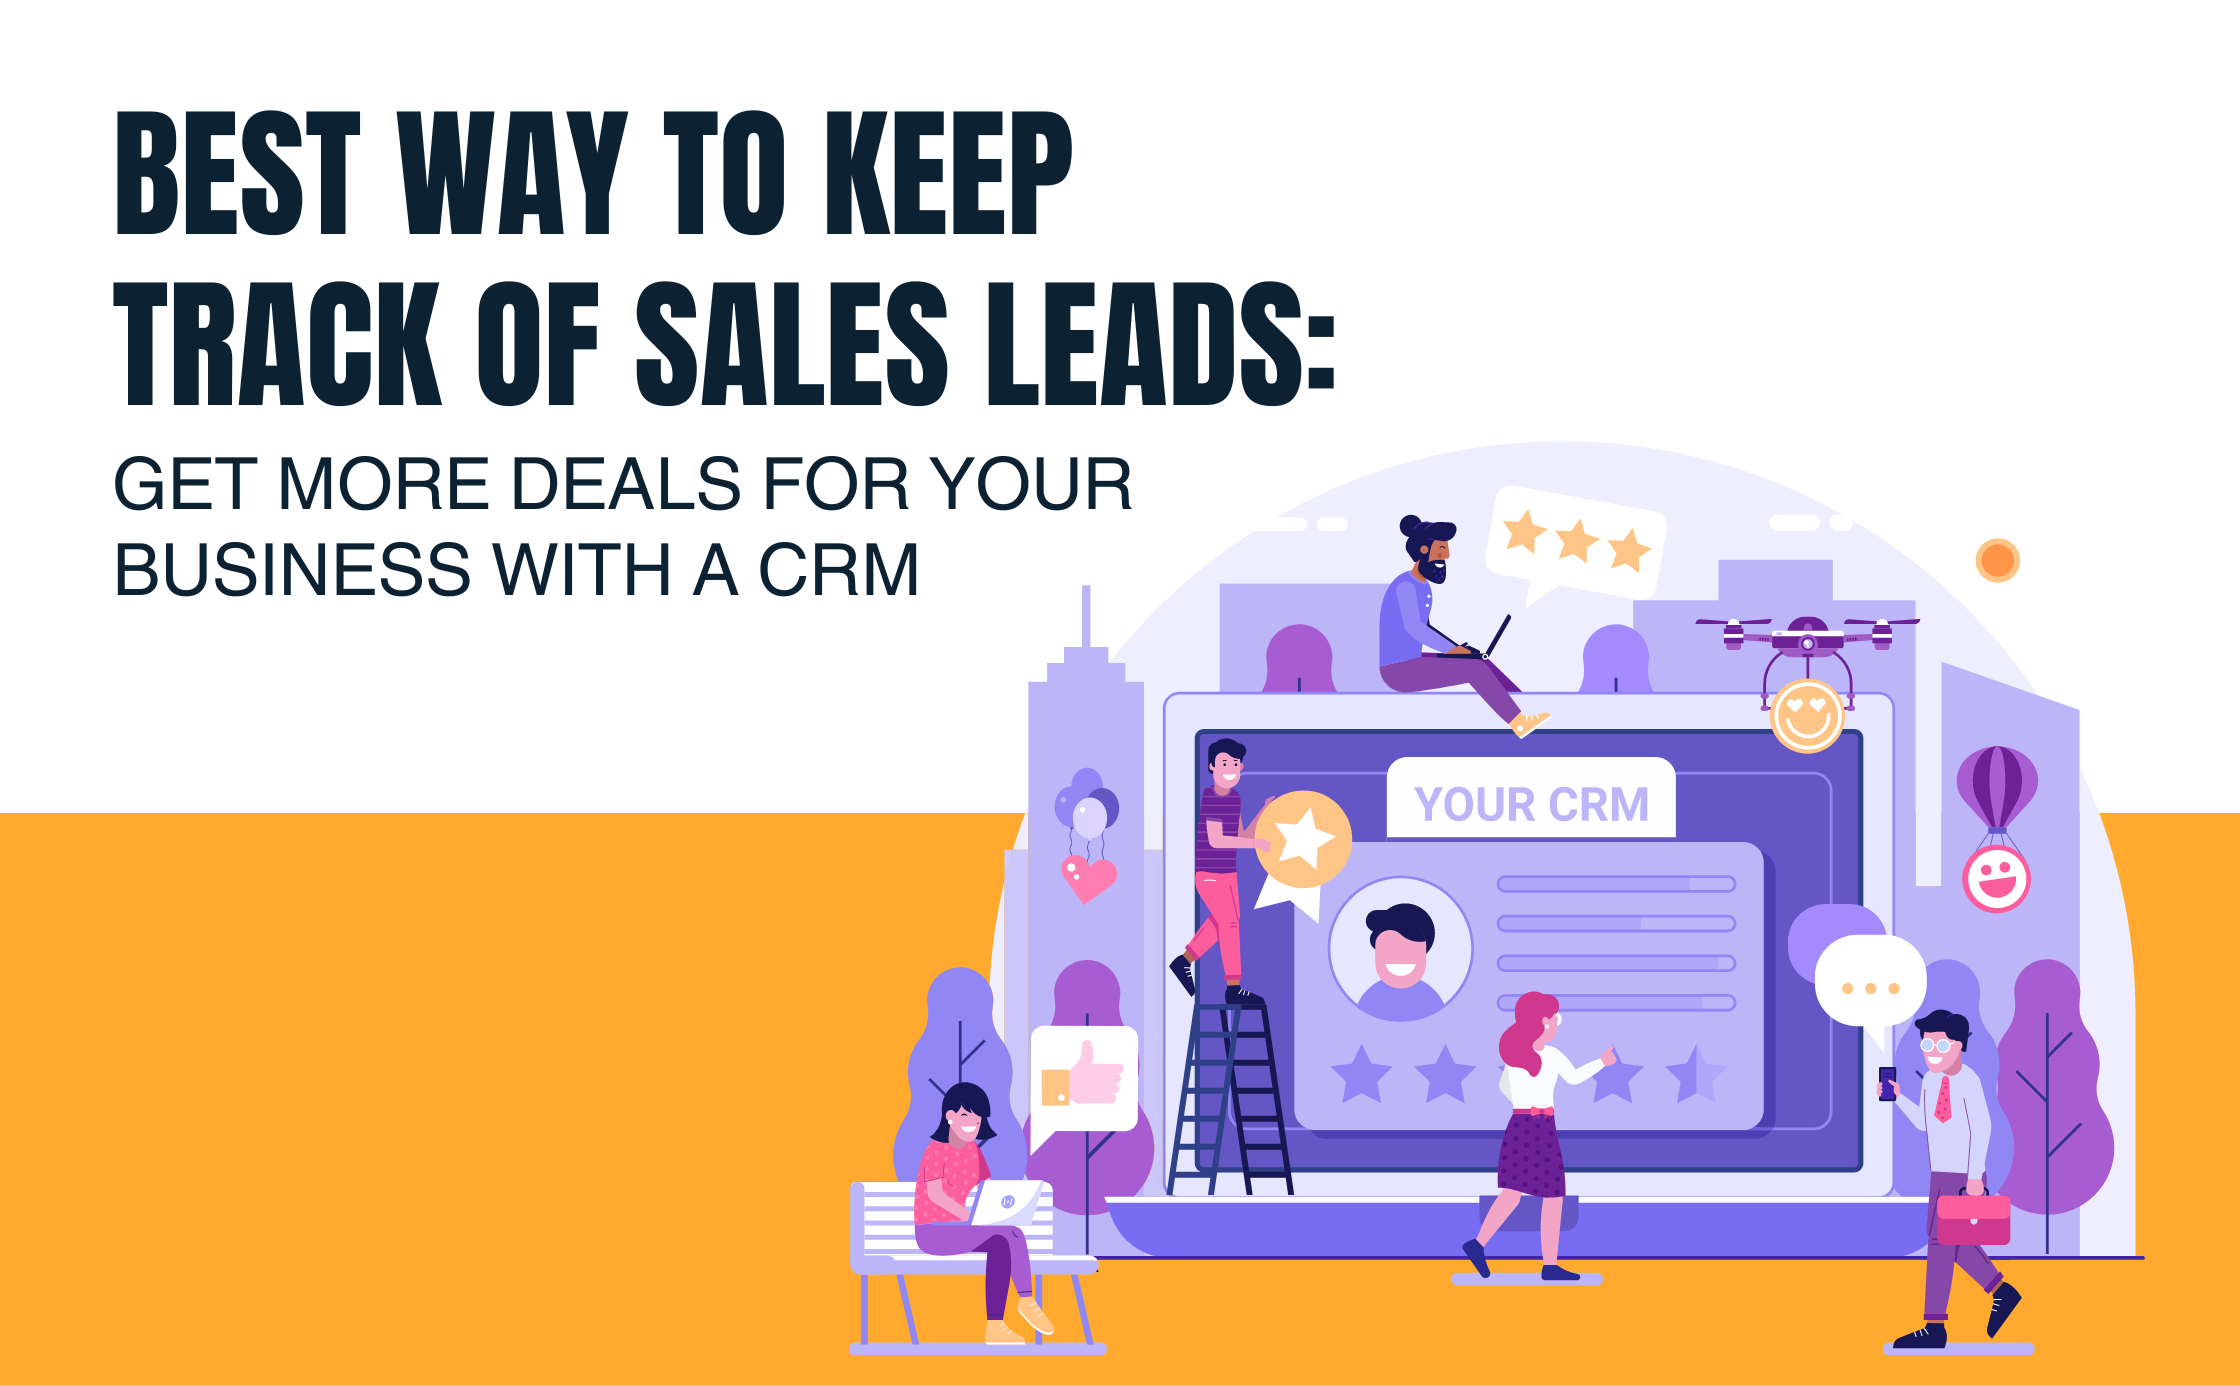 Best Way to Keep Track of Sales Leads: Get More Deals for Your Business With a CRM